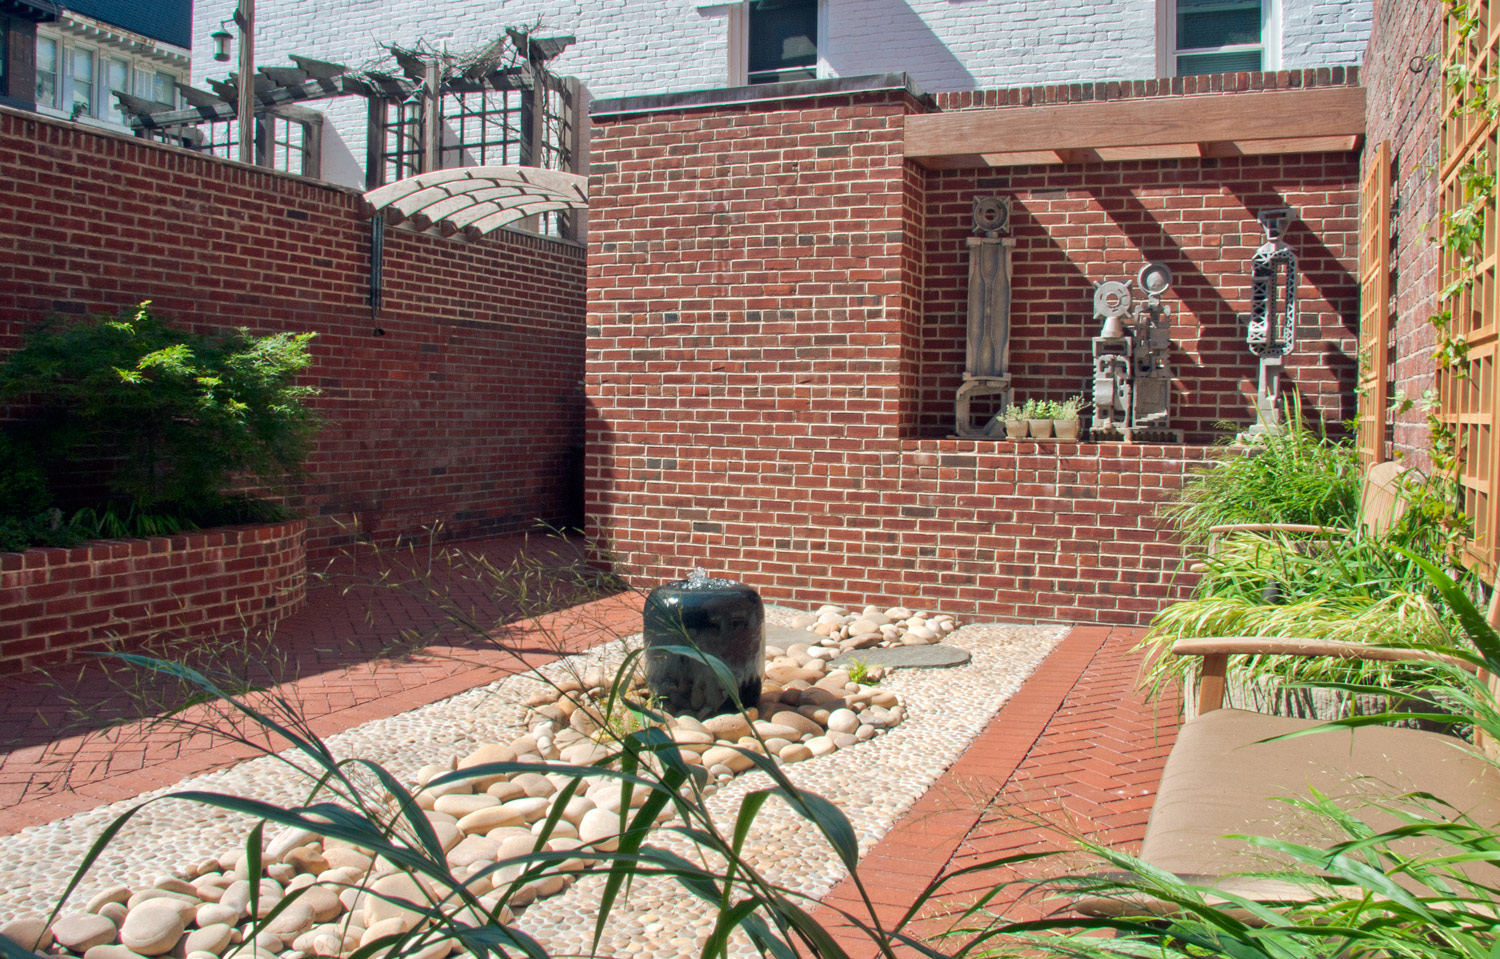   Project Location: &nbsp;Washington, DC (Logan Circle)  Completion: &nbsp;Winter 2010  General Contractor: &nbsp;Redux Garden &amp; Home  Primary Material Palette: &nbsp;permeable clay pavers, black granite (fountain), antique granite (planters), ip